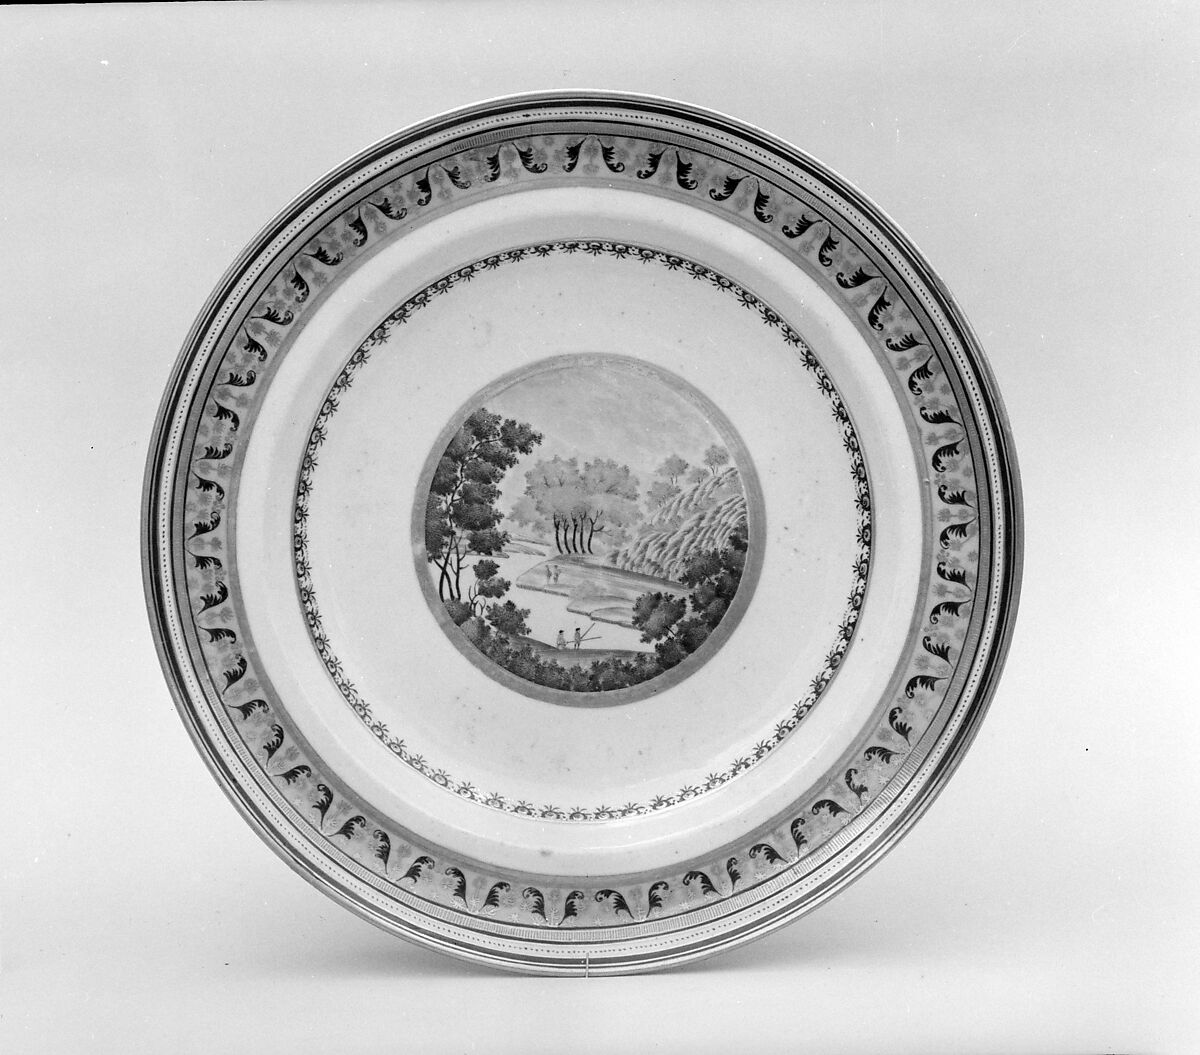 Soup Plate, Porcelain, Chinese 